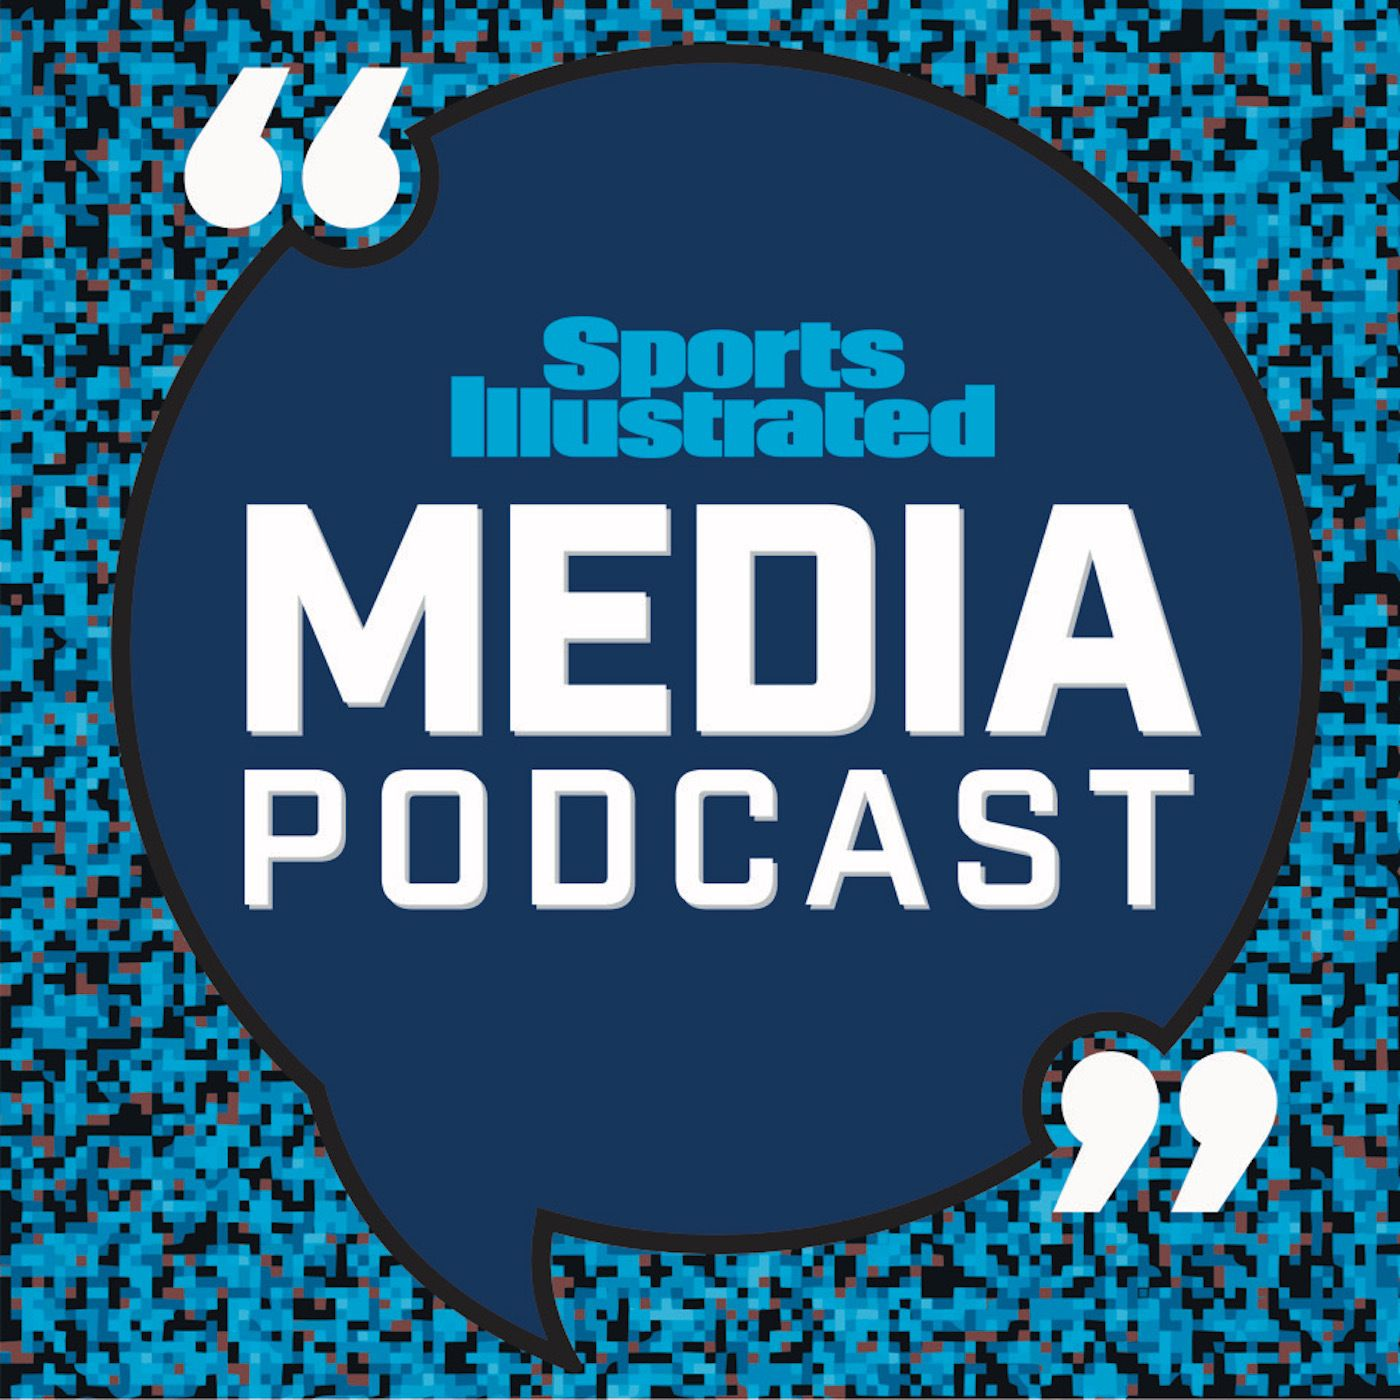 A highlight from NFL VP of Broadcast Planning, Mike North, on NFL Schedule + Dan Rapaport on Golf